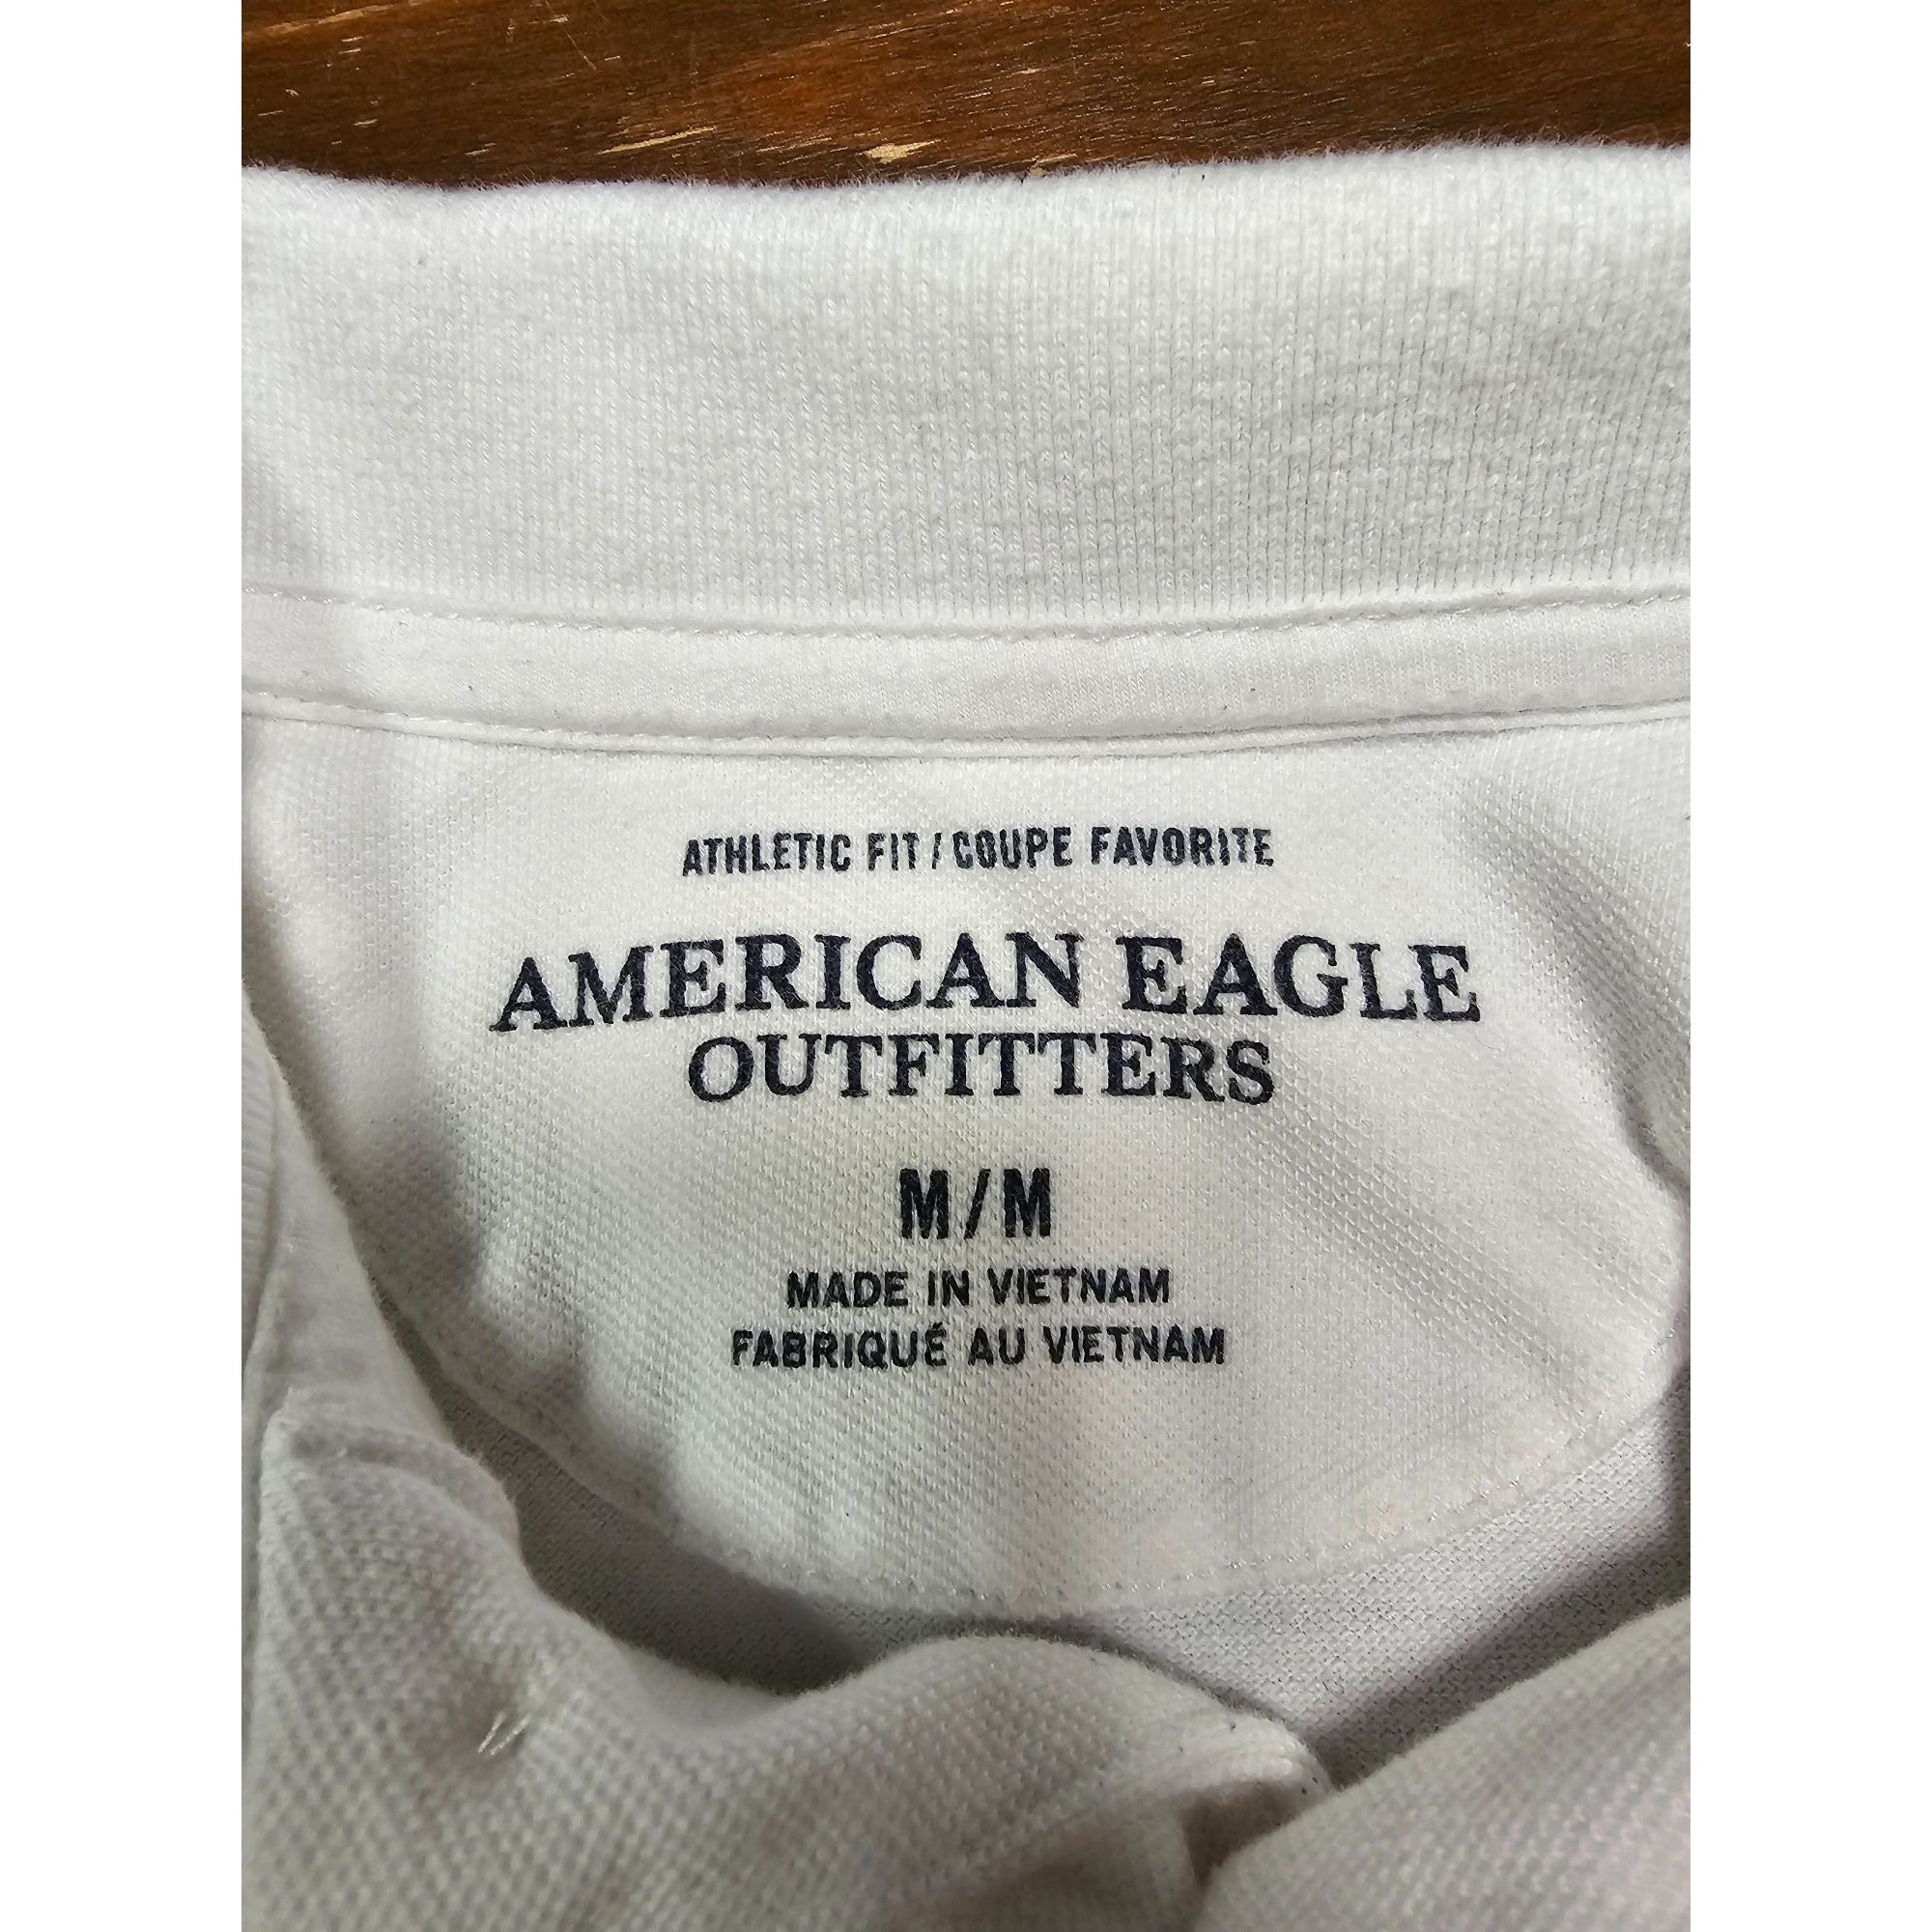 American Eagle Outfitters White Polo Shirt, Size Medium